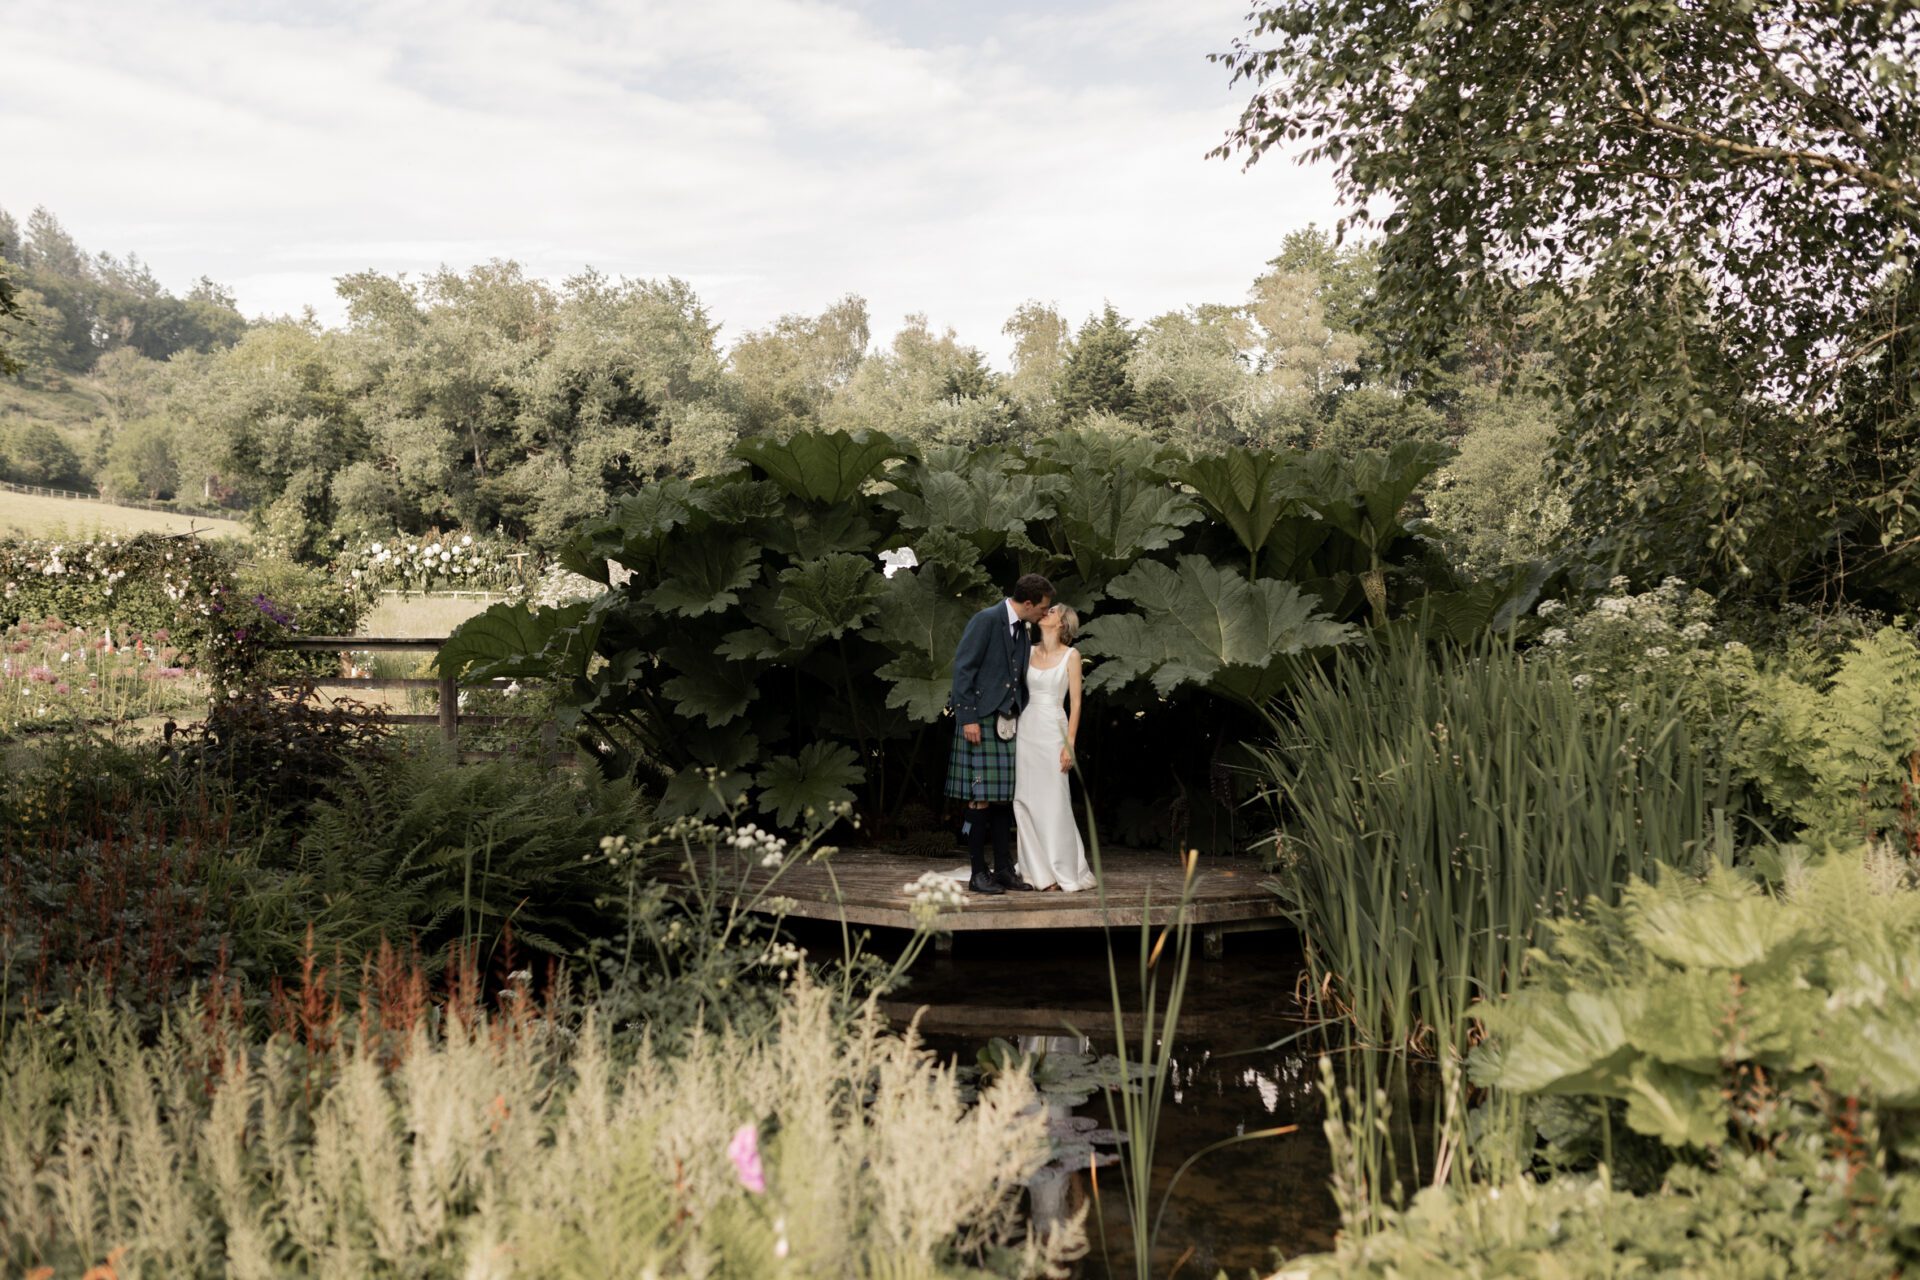 The bride and groom pose for a portrait next to a pond